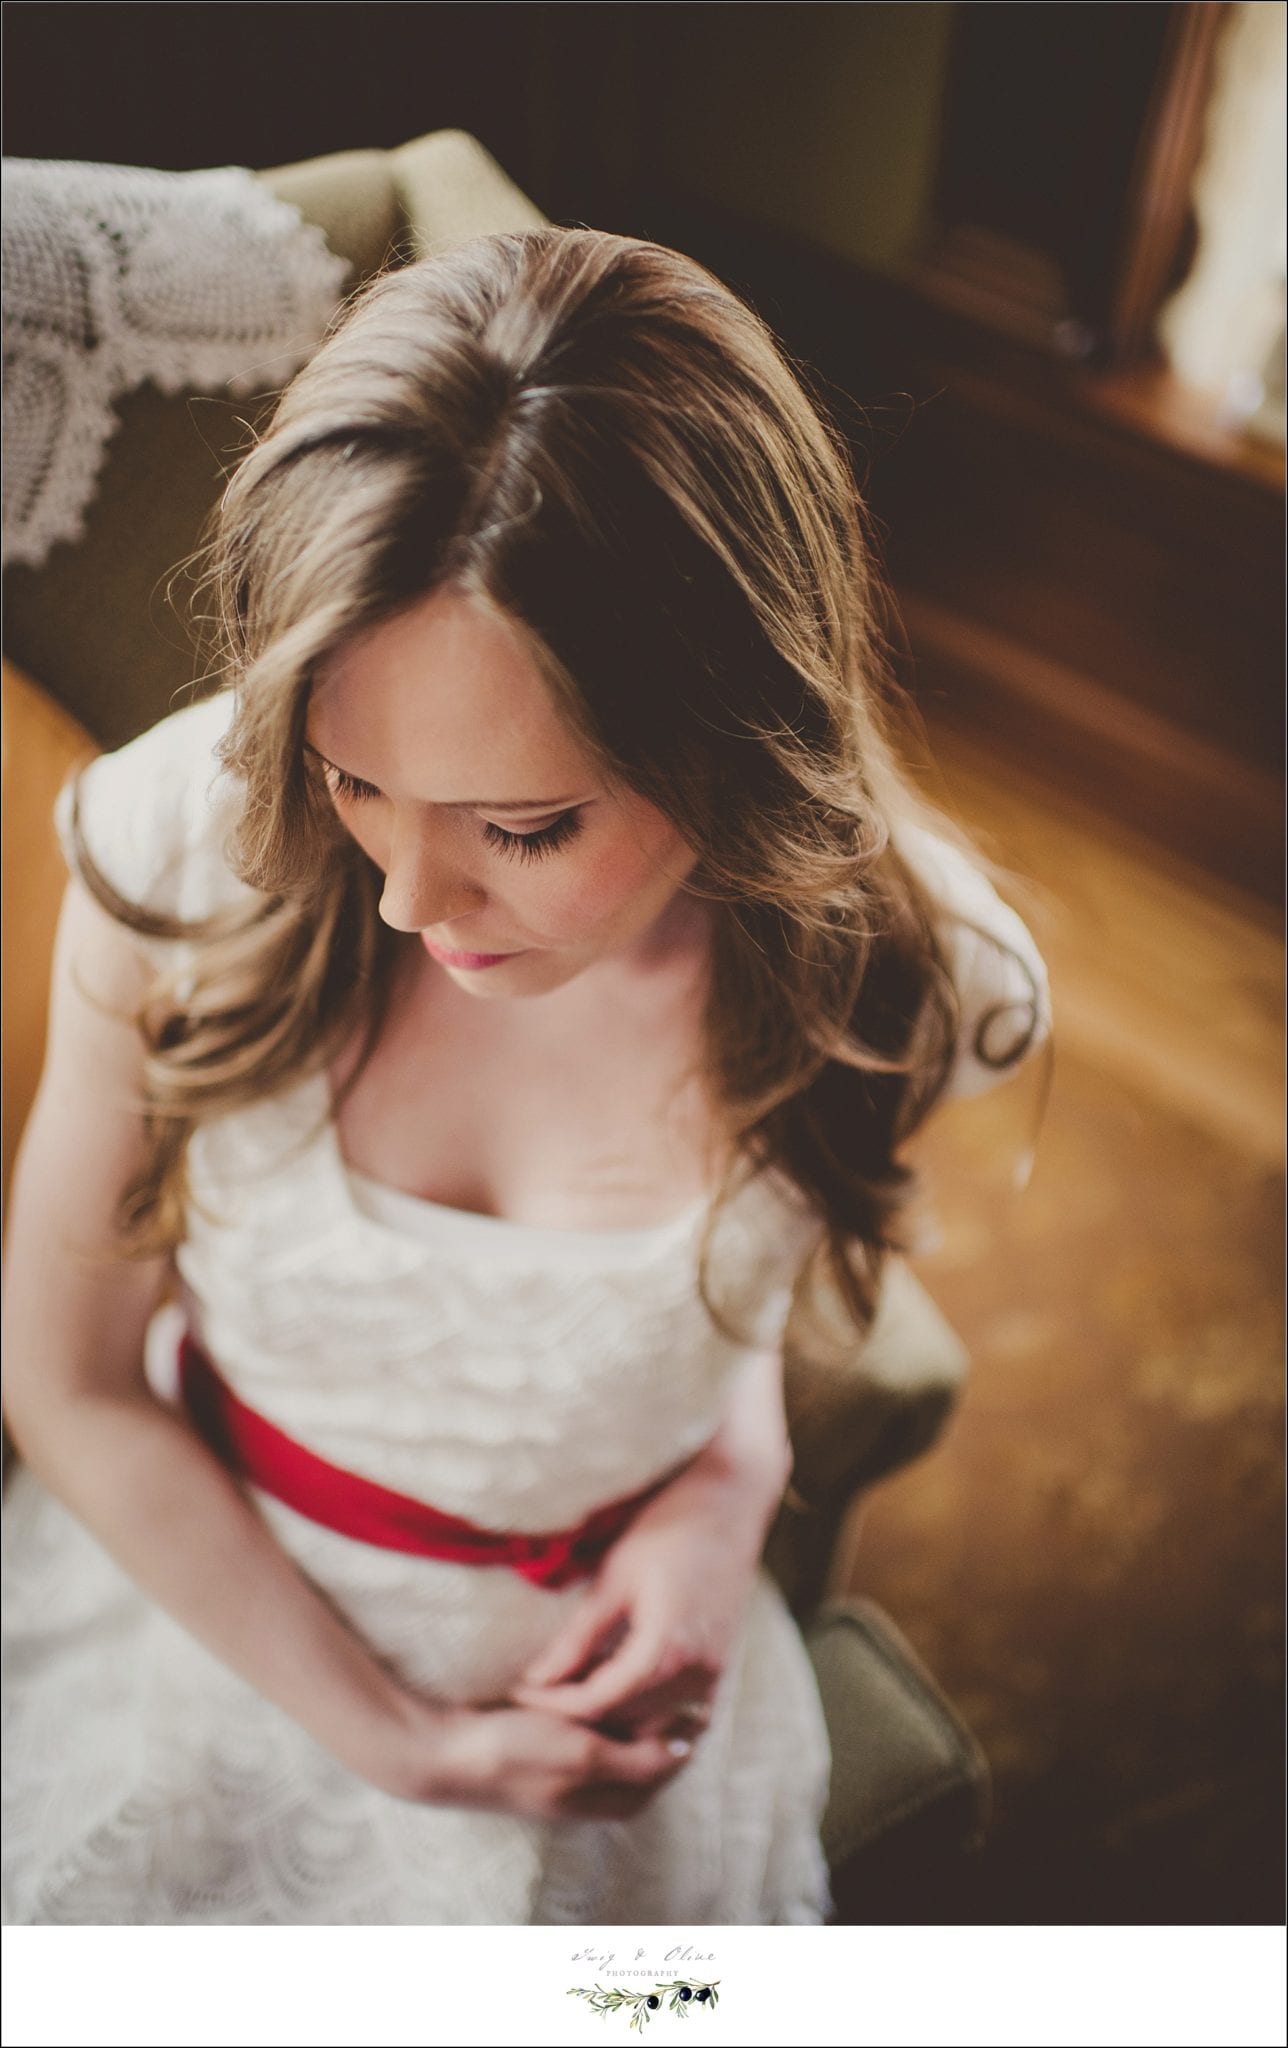 dresses, rustic sessions, engagements and couples, beautiful brides to be, Fort Wayne to Sun prairie